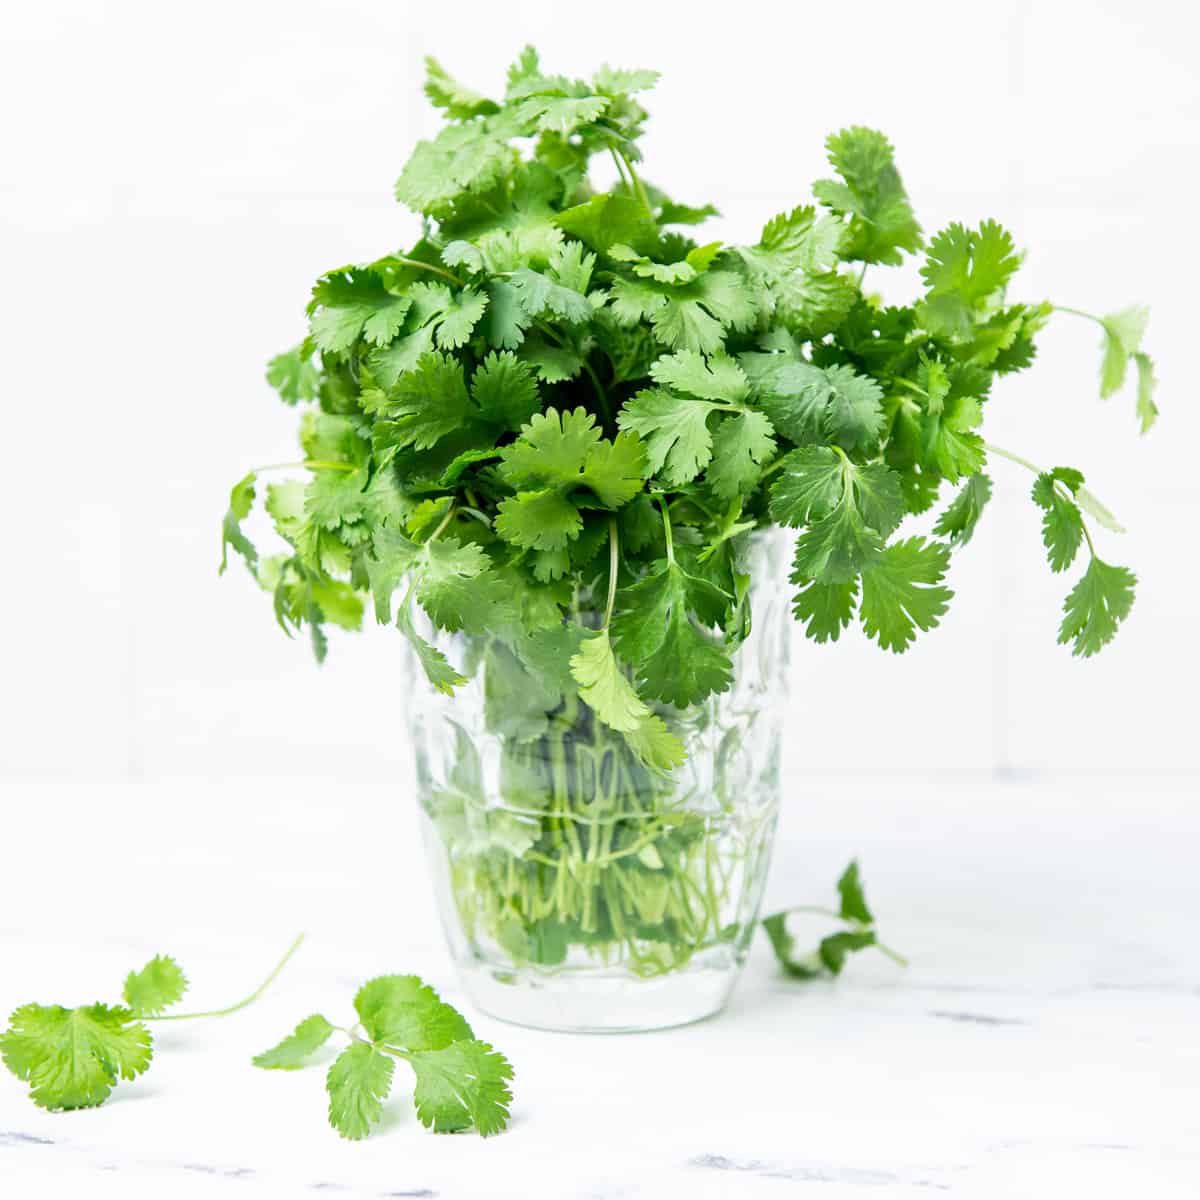 Cilantro stems in a clear glass jar with water.